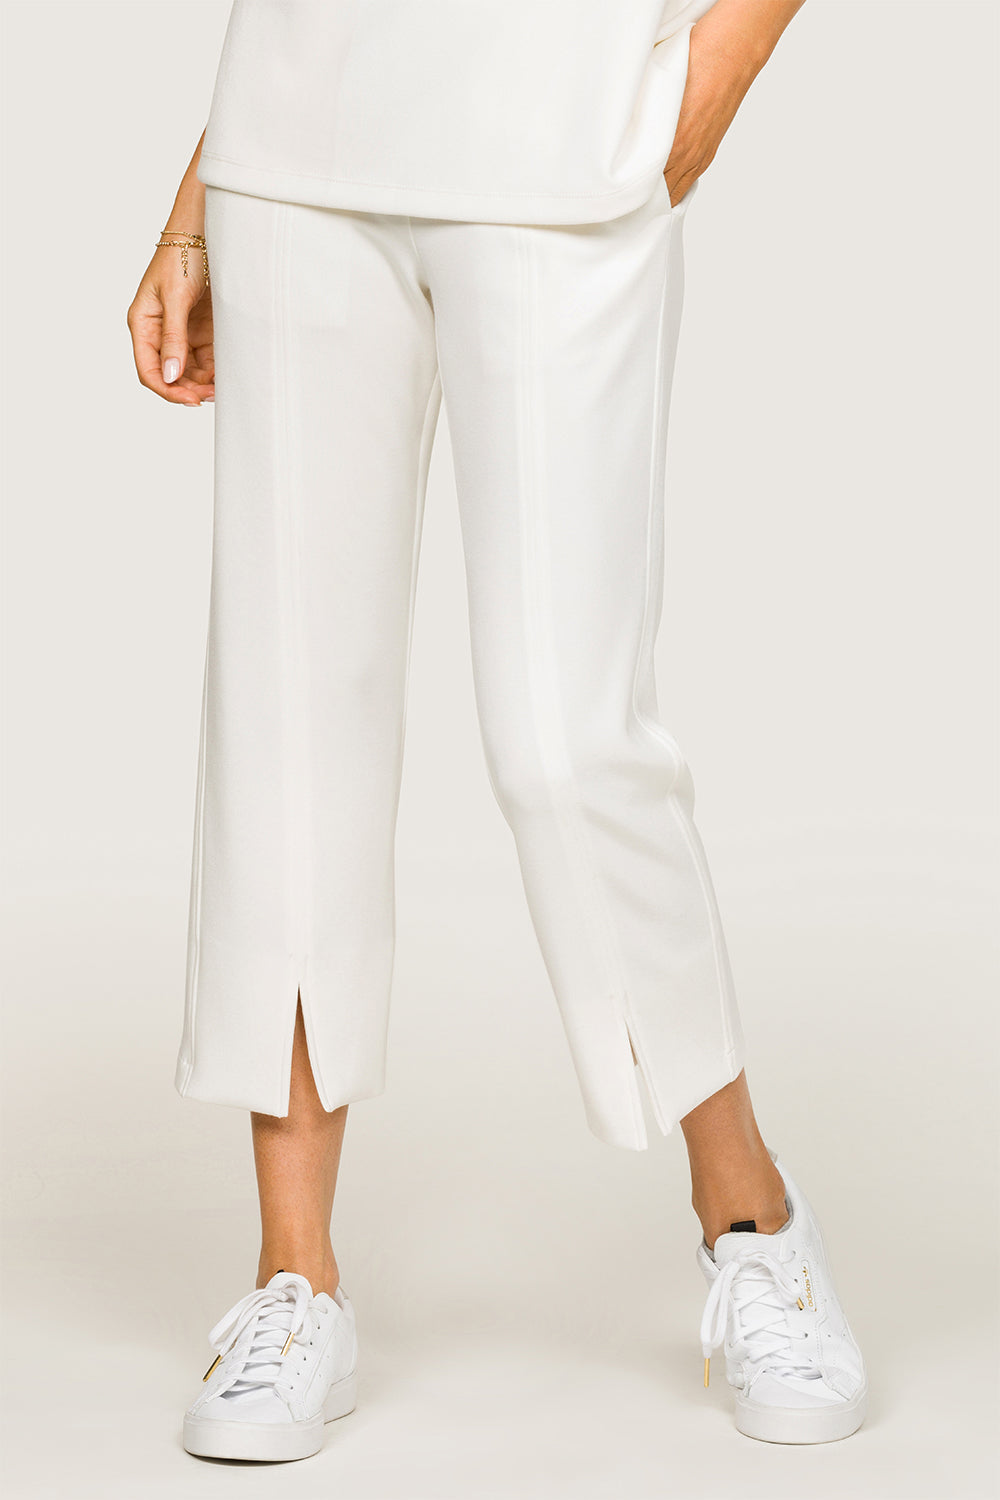 Alala women's soft crop pant in white